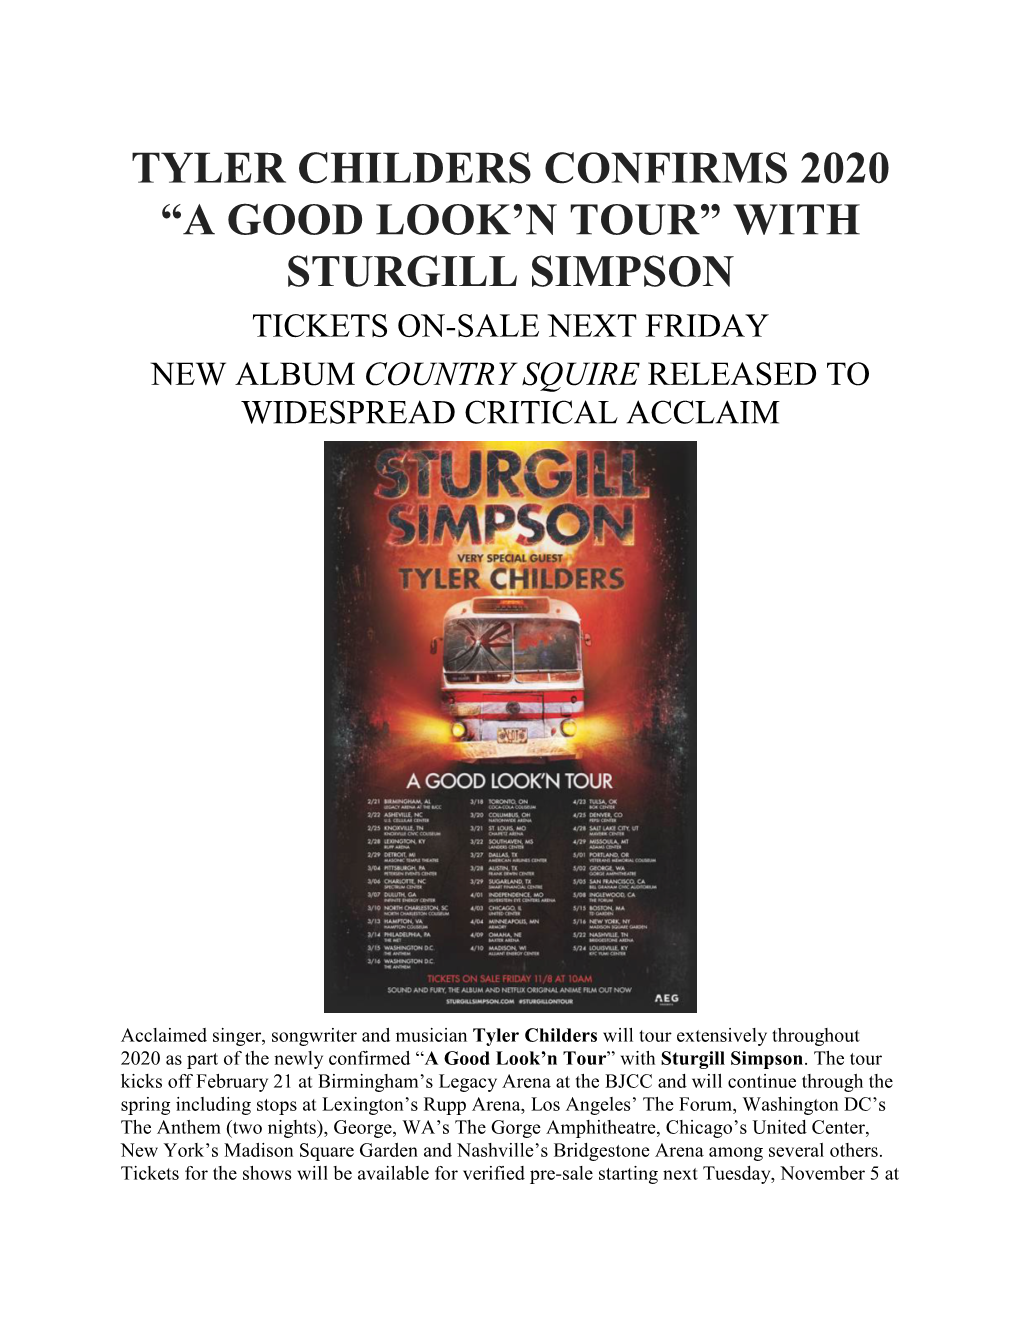 Tyler Childers Confirms 2020 “A Good Look'n Tour” With